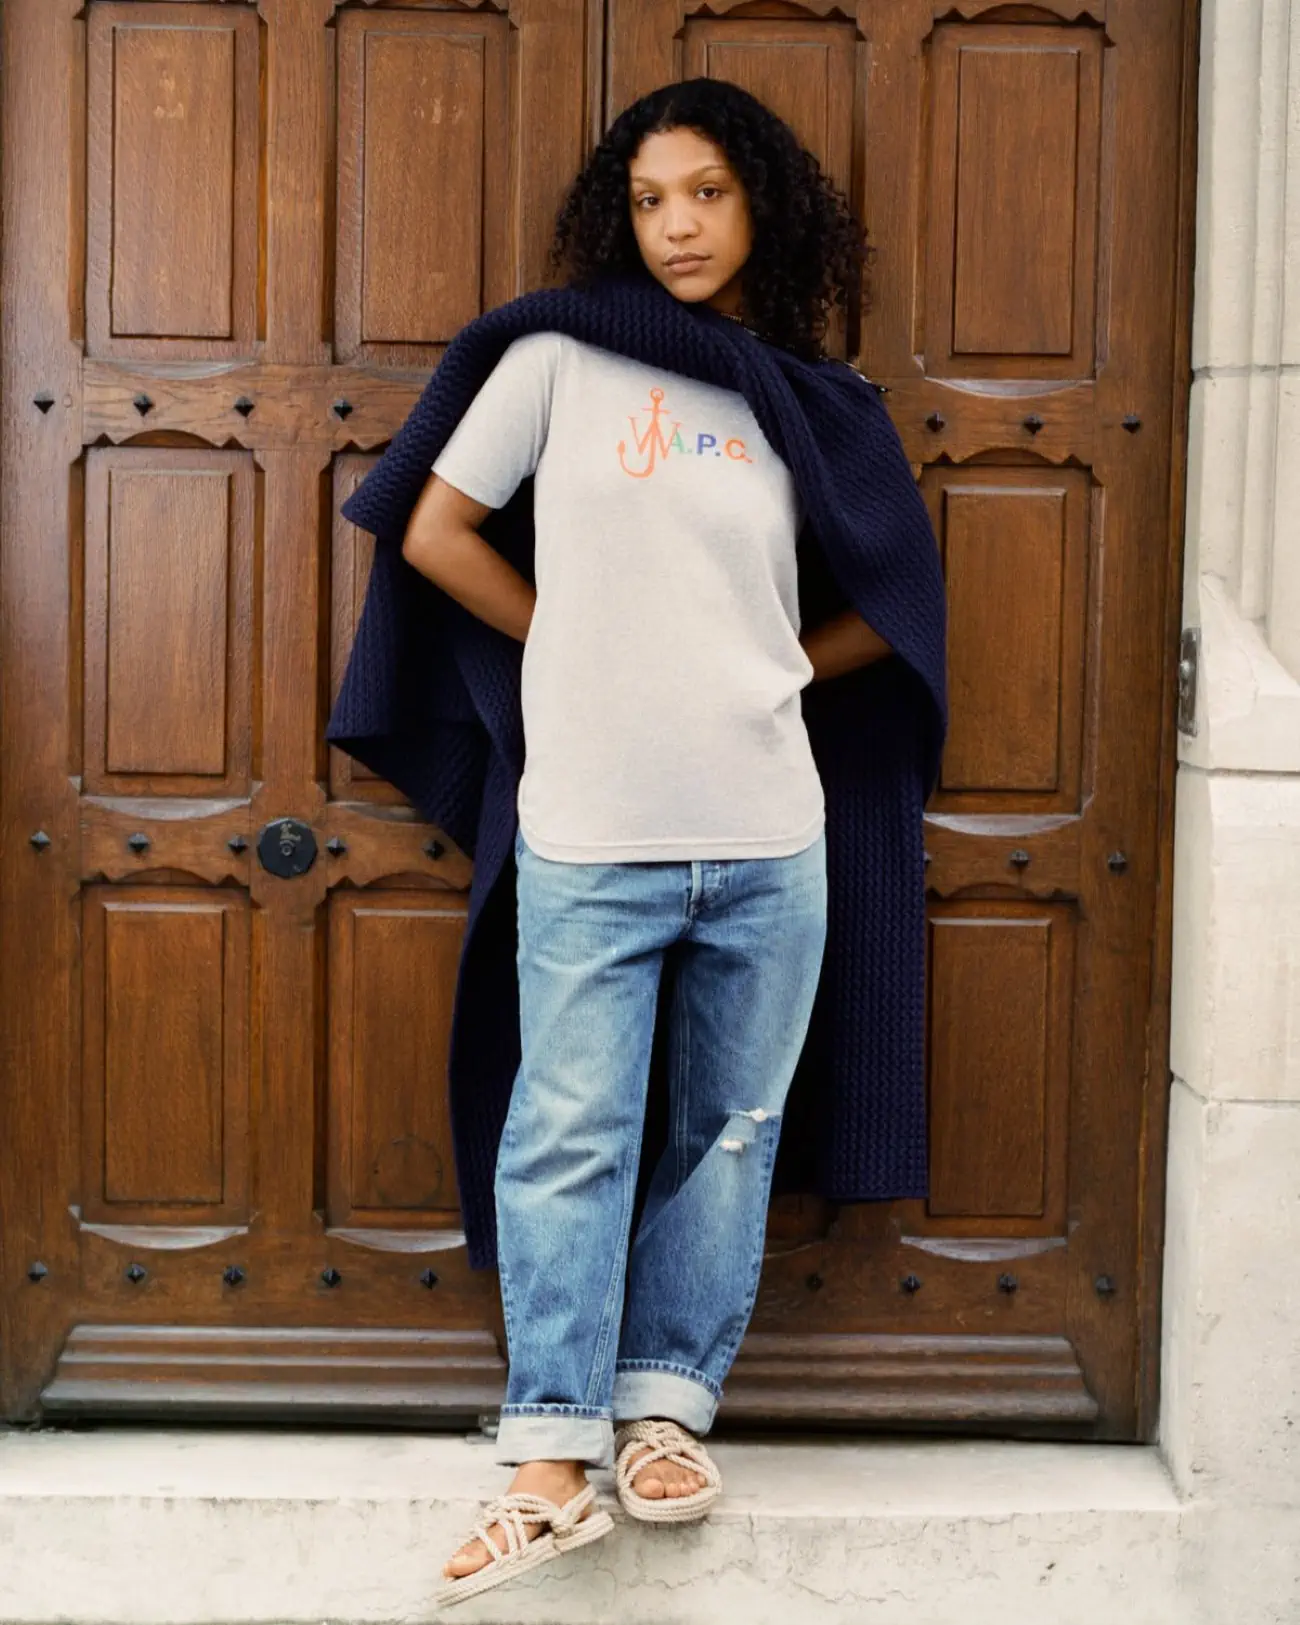 Joseph Beuys' spirit revived in JW Anderson x A.P.C. collaboration